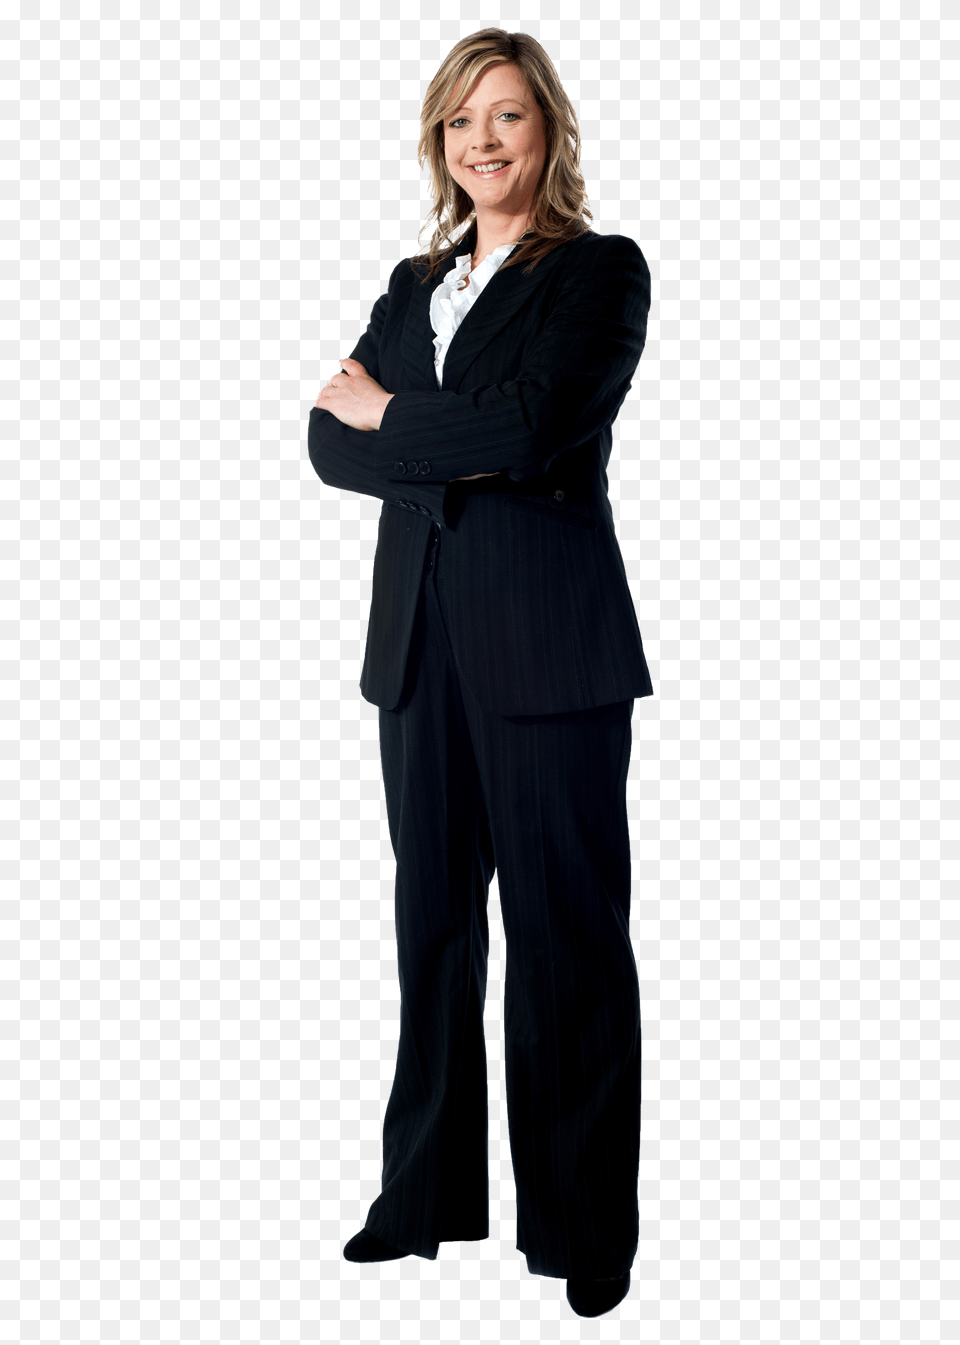 Business Women Stock Photo Play, Woman, Person, Suit, Formal Wear Png